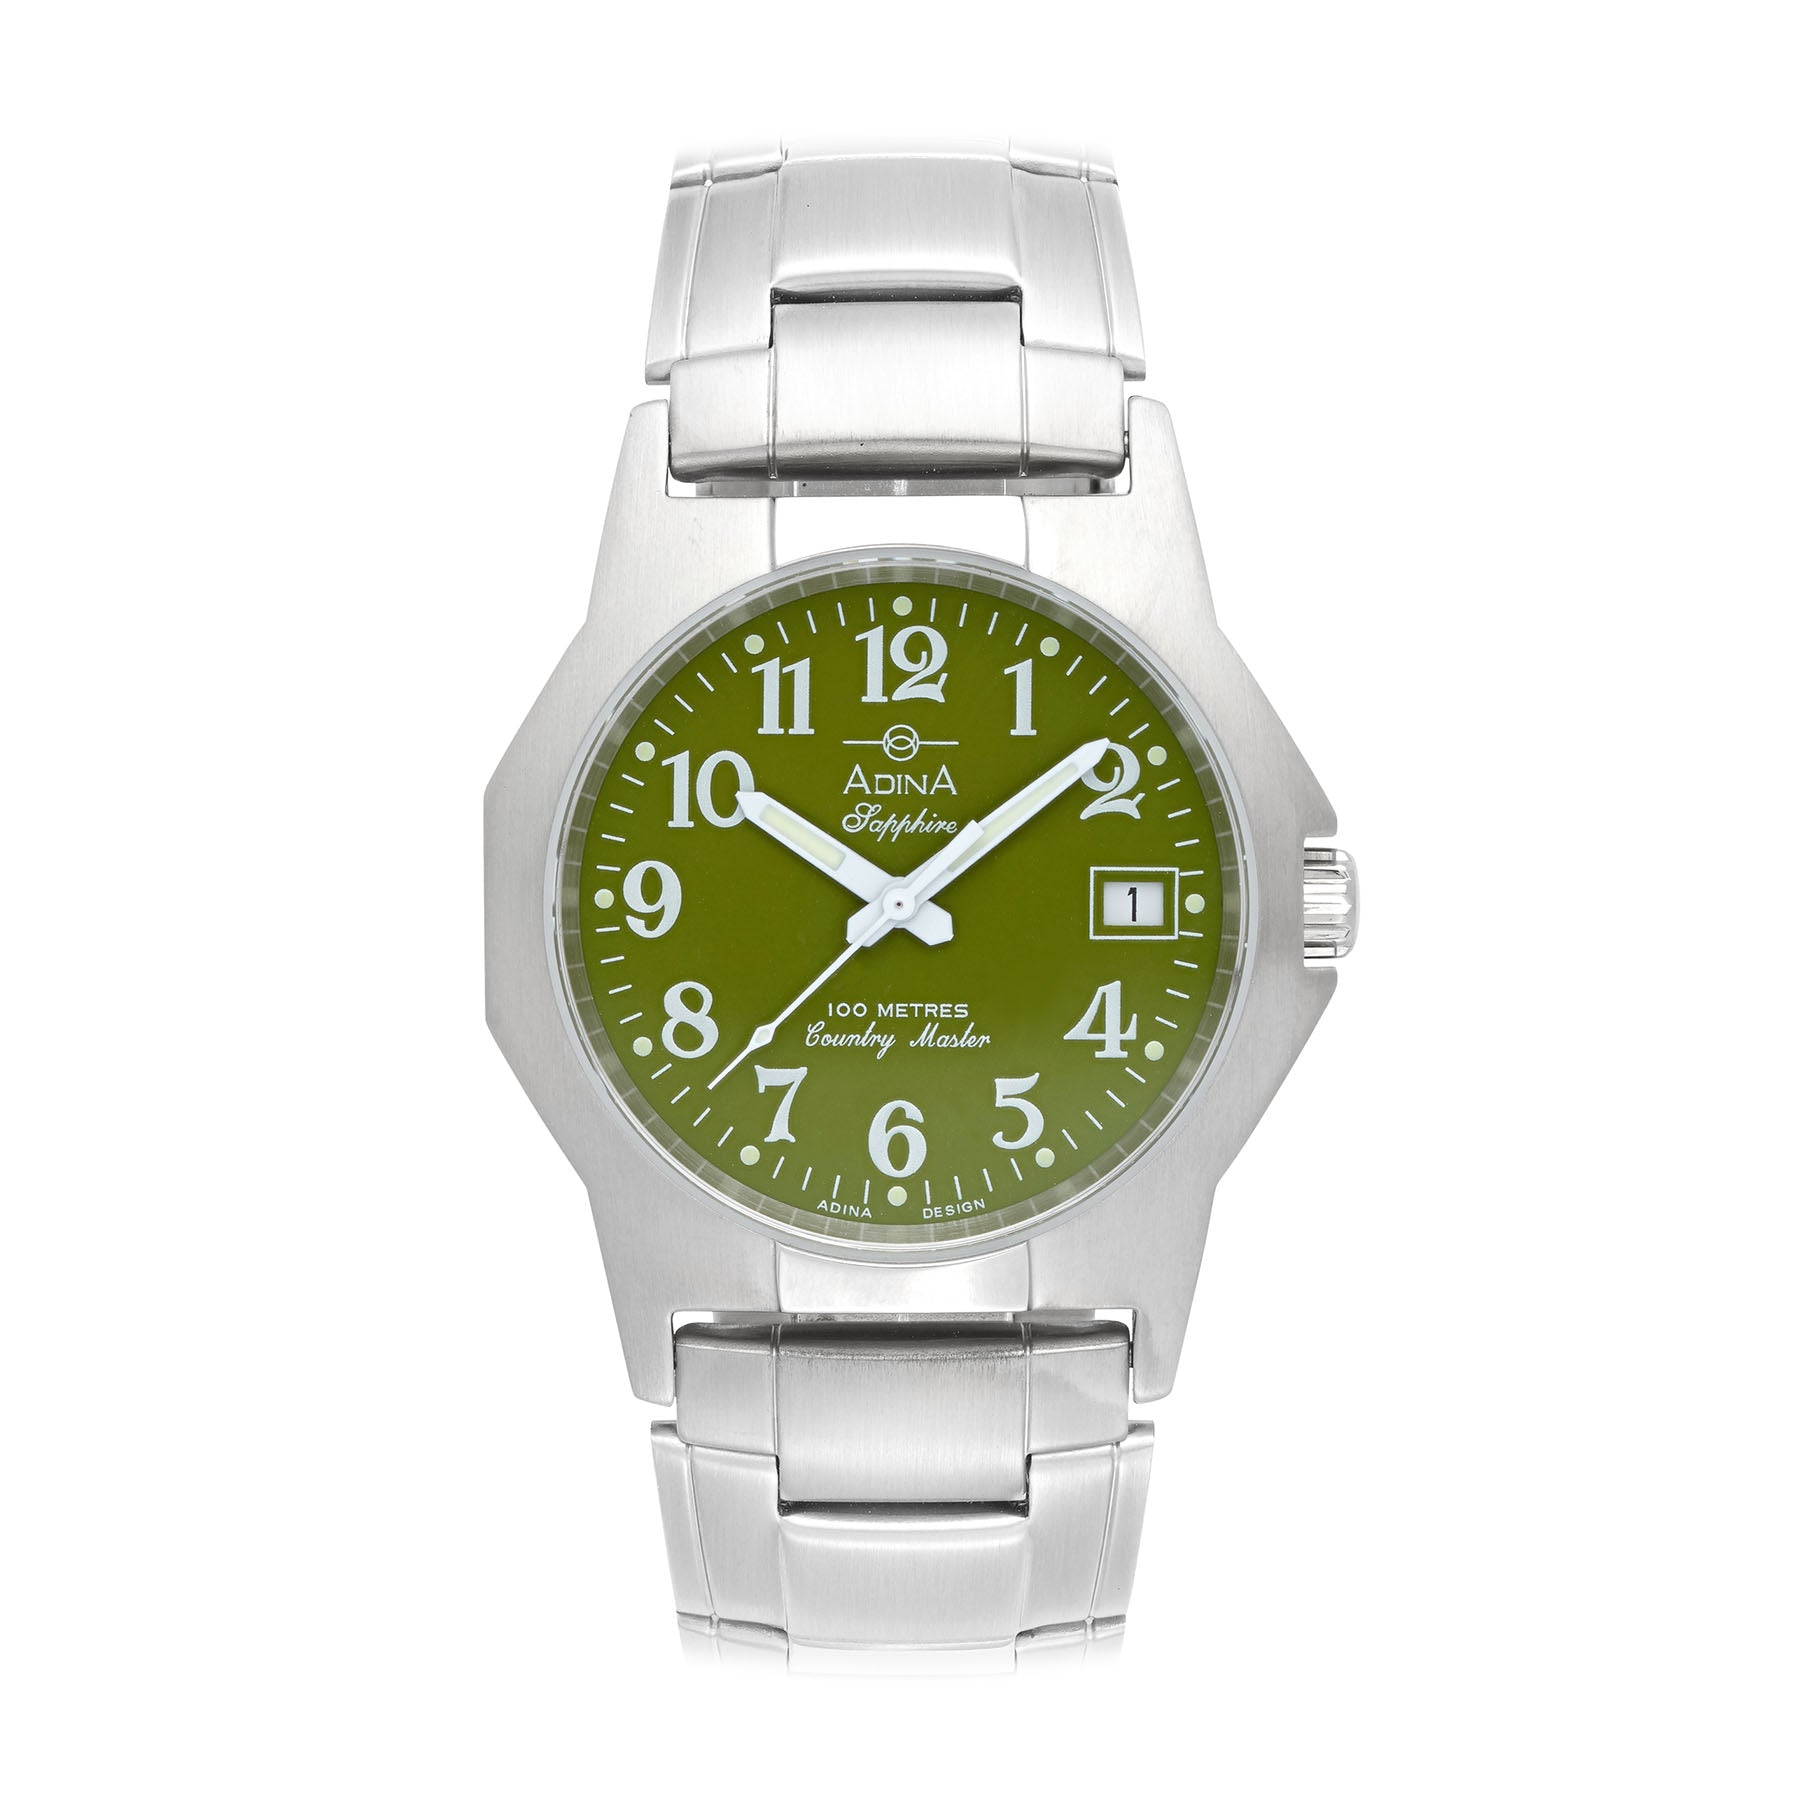 Adina Limited Edition Country Master Watch - Green Dial with Numbers, Bracelet, Sapphire Glass